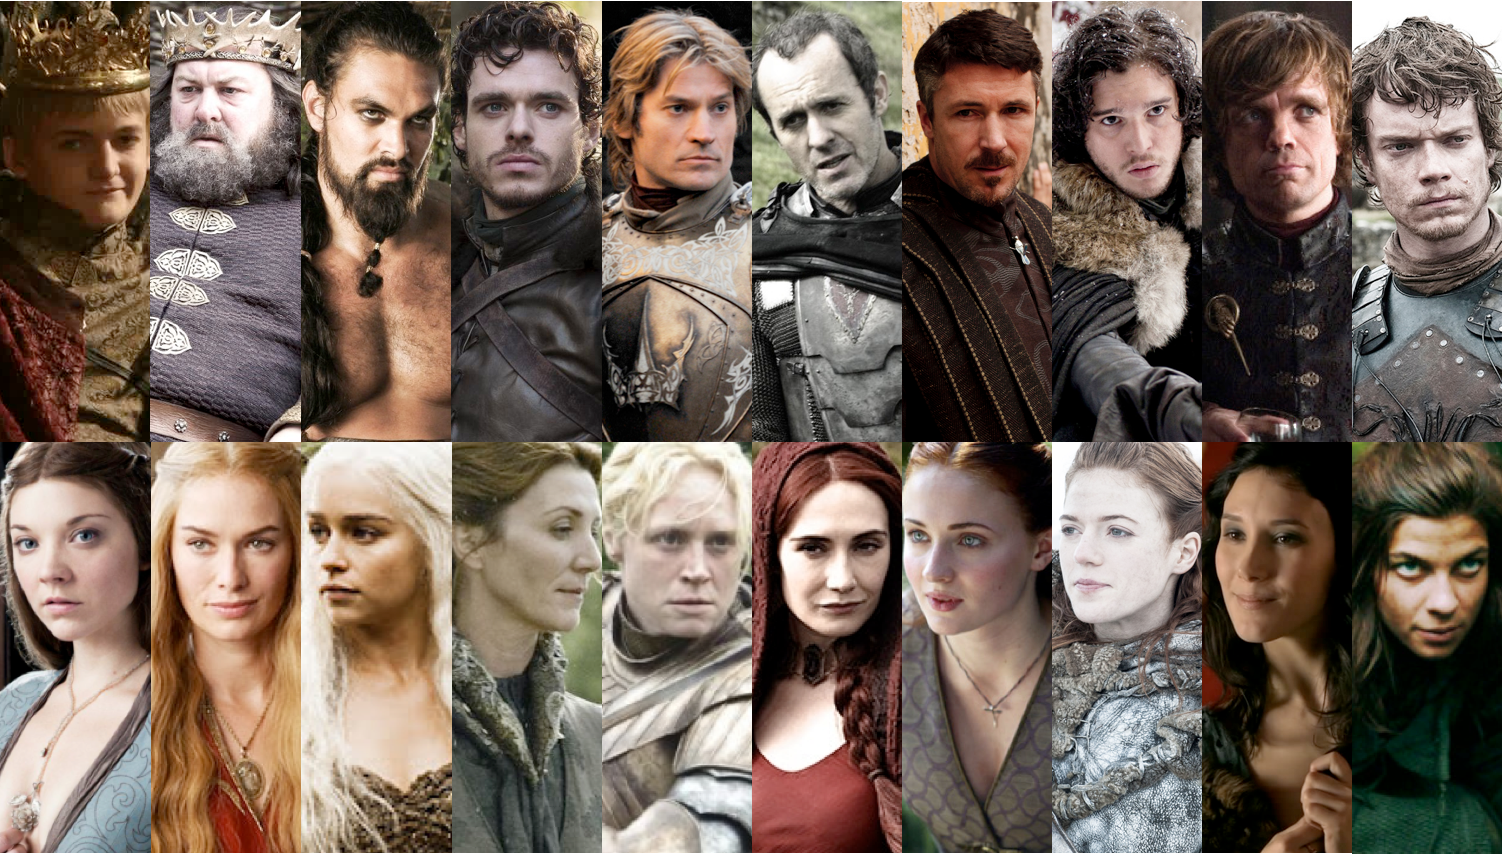 My Favourite Characters from Game of Thrones